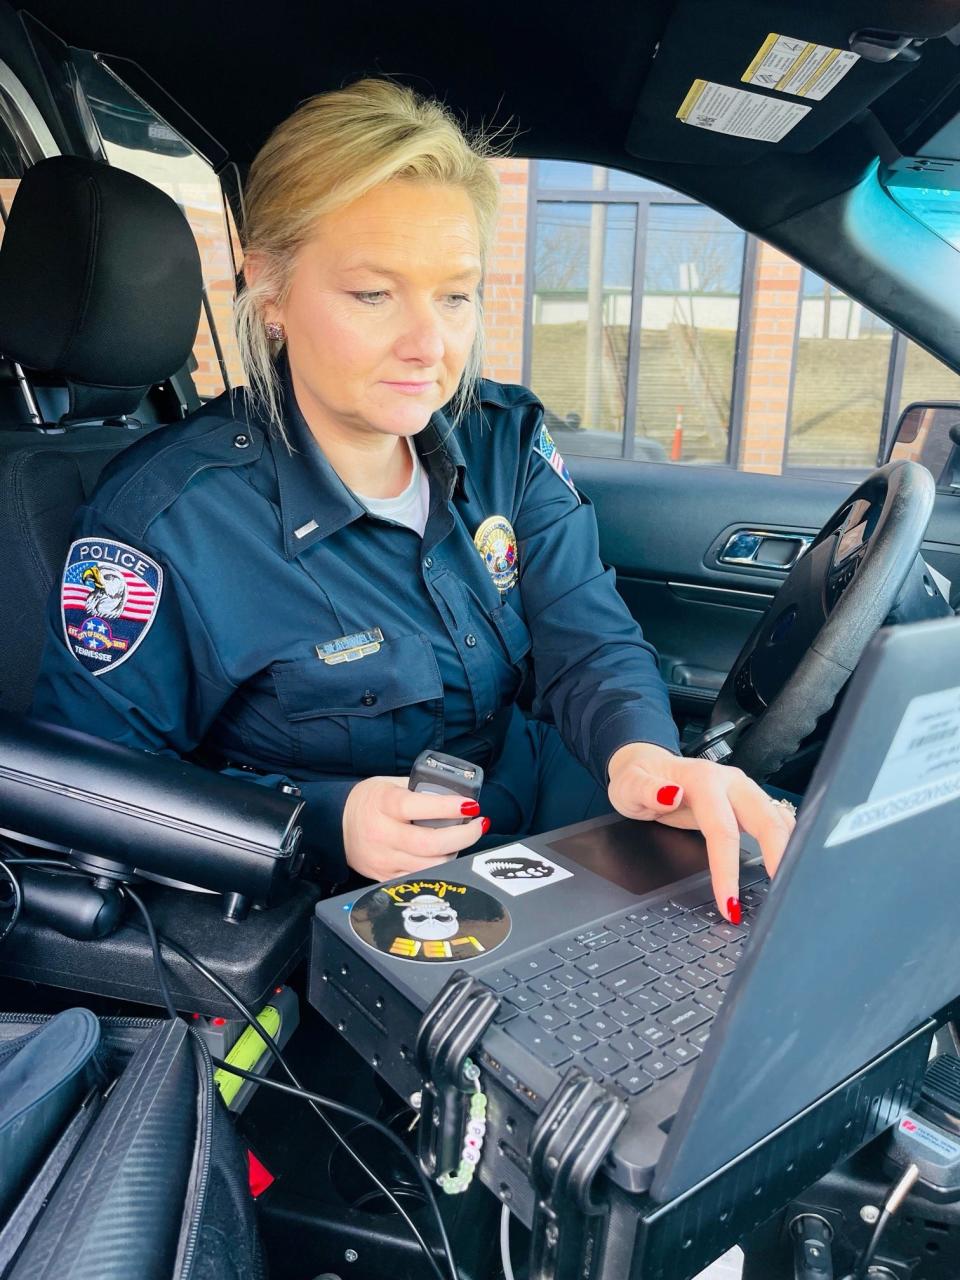 The Sandusky County 911 System, which works with the county’s Computer Automated Dispatch system that is in all the cruisers, EMS squads and fire trucks, is getting a digital upgrade, that will include functions for video, picture and text.